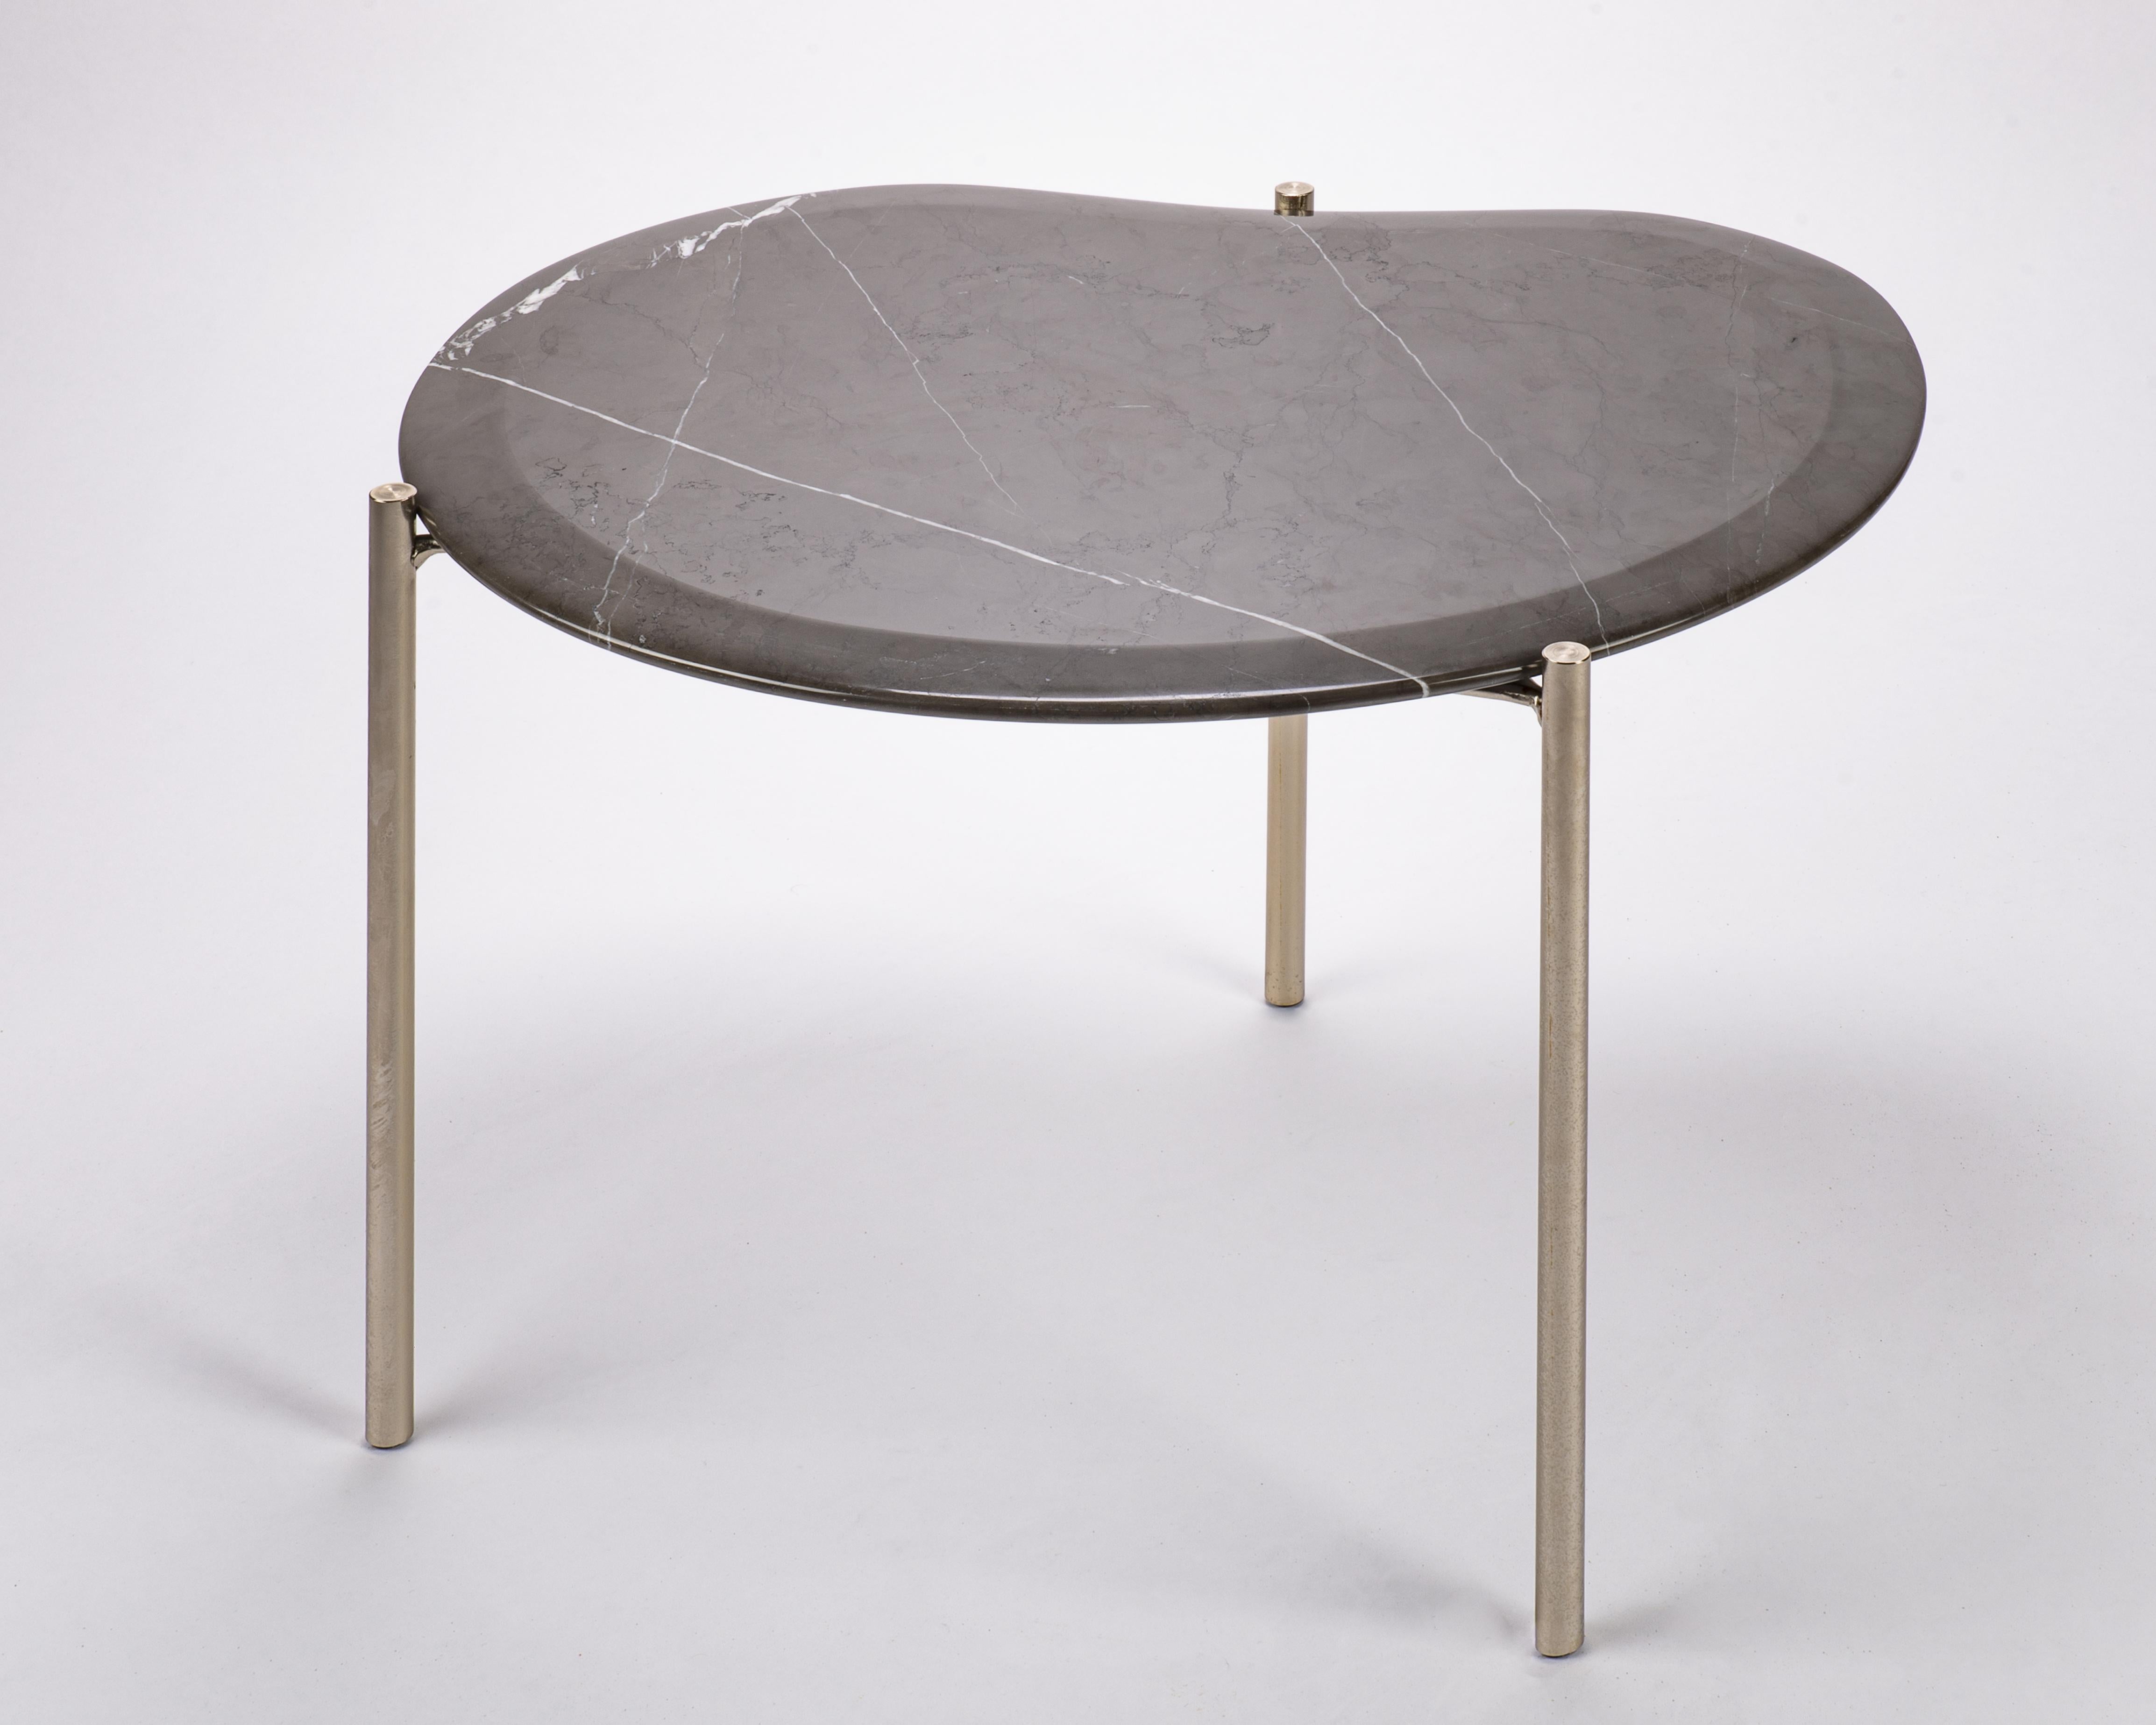 Table No.1 by Anežka Závadová
Materials: Nori Marble and Steel Skeleton in Satin Brass Finish
Dimensions: 57.4 x 45.3 x 39.8 cm

Anezka Zavadova has been with Preciosa Lighting since 2016. As a senior designer in the company’s Middle East